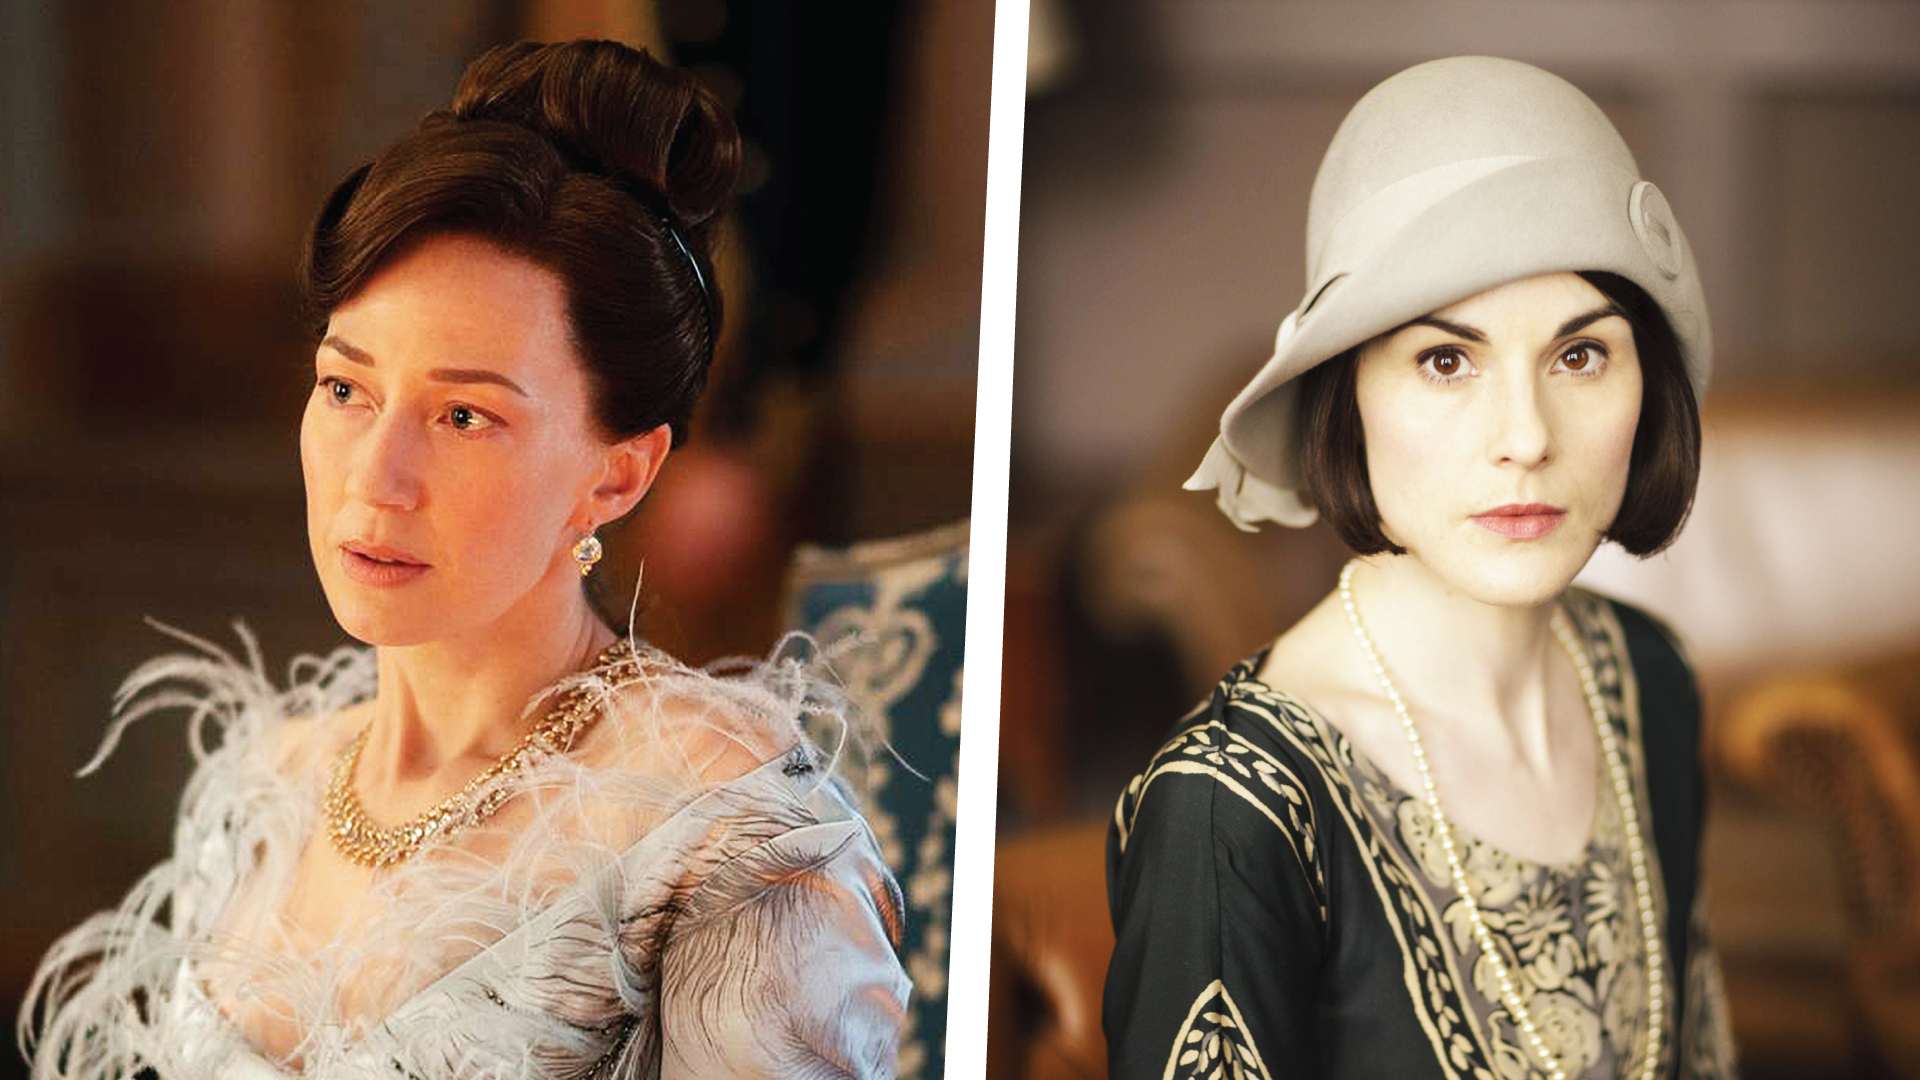 Period piece drama The Gilded Age starring Carrie Coon and Downton Abby on Masterpiece on PBS starring Michelle Dockery as Lady Mary Crawley 